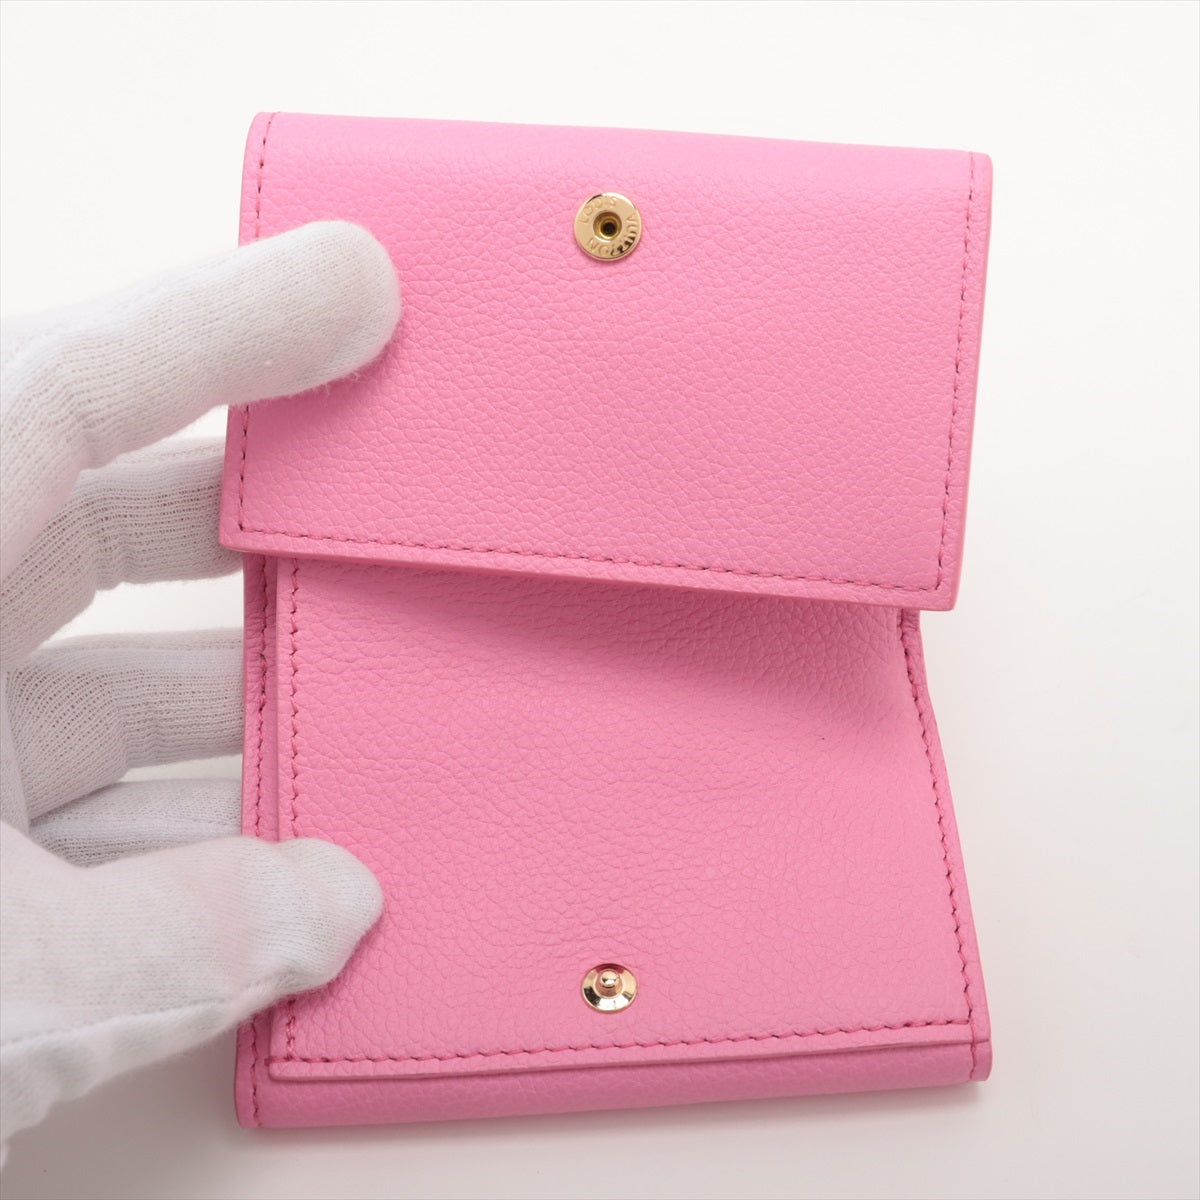 Louis Vuitton Taurillon Portefeuille Lock Mini Model number Pink Compact Wallet M82436 Personal engraving